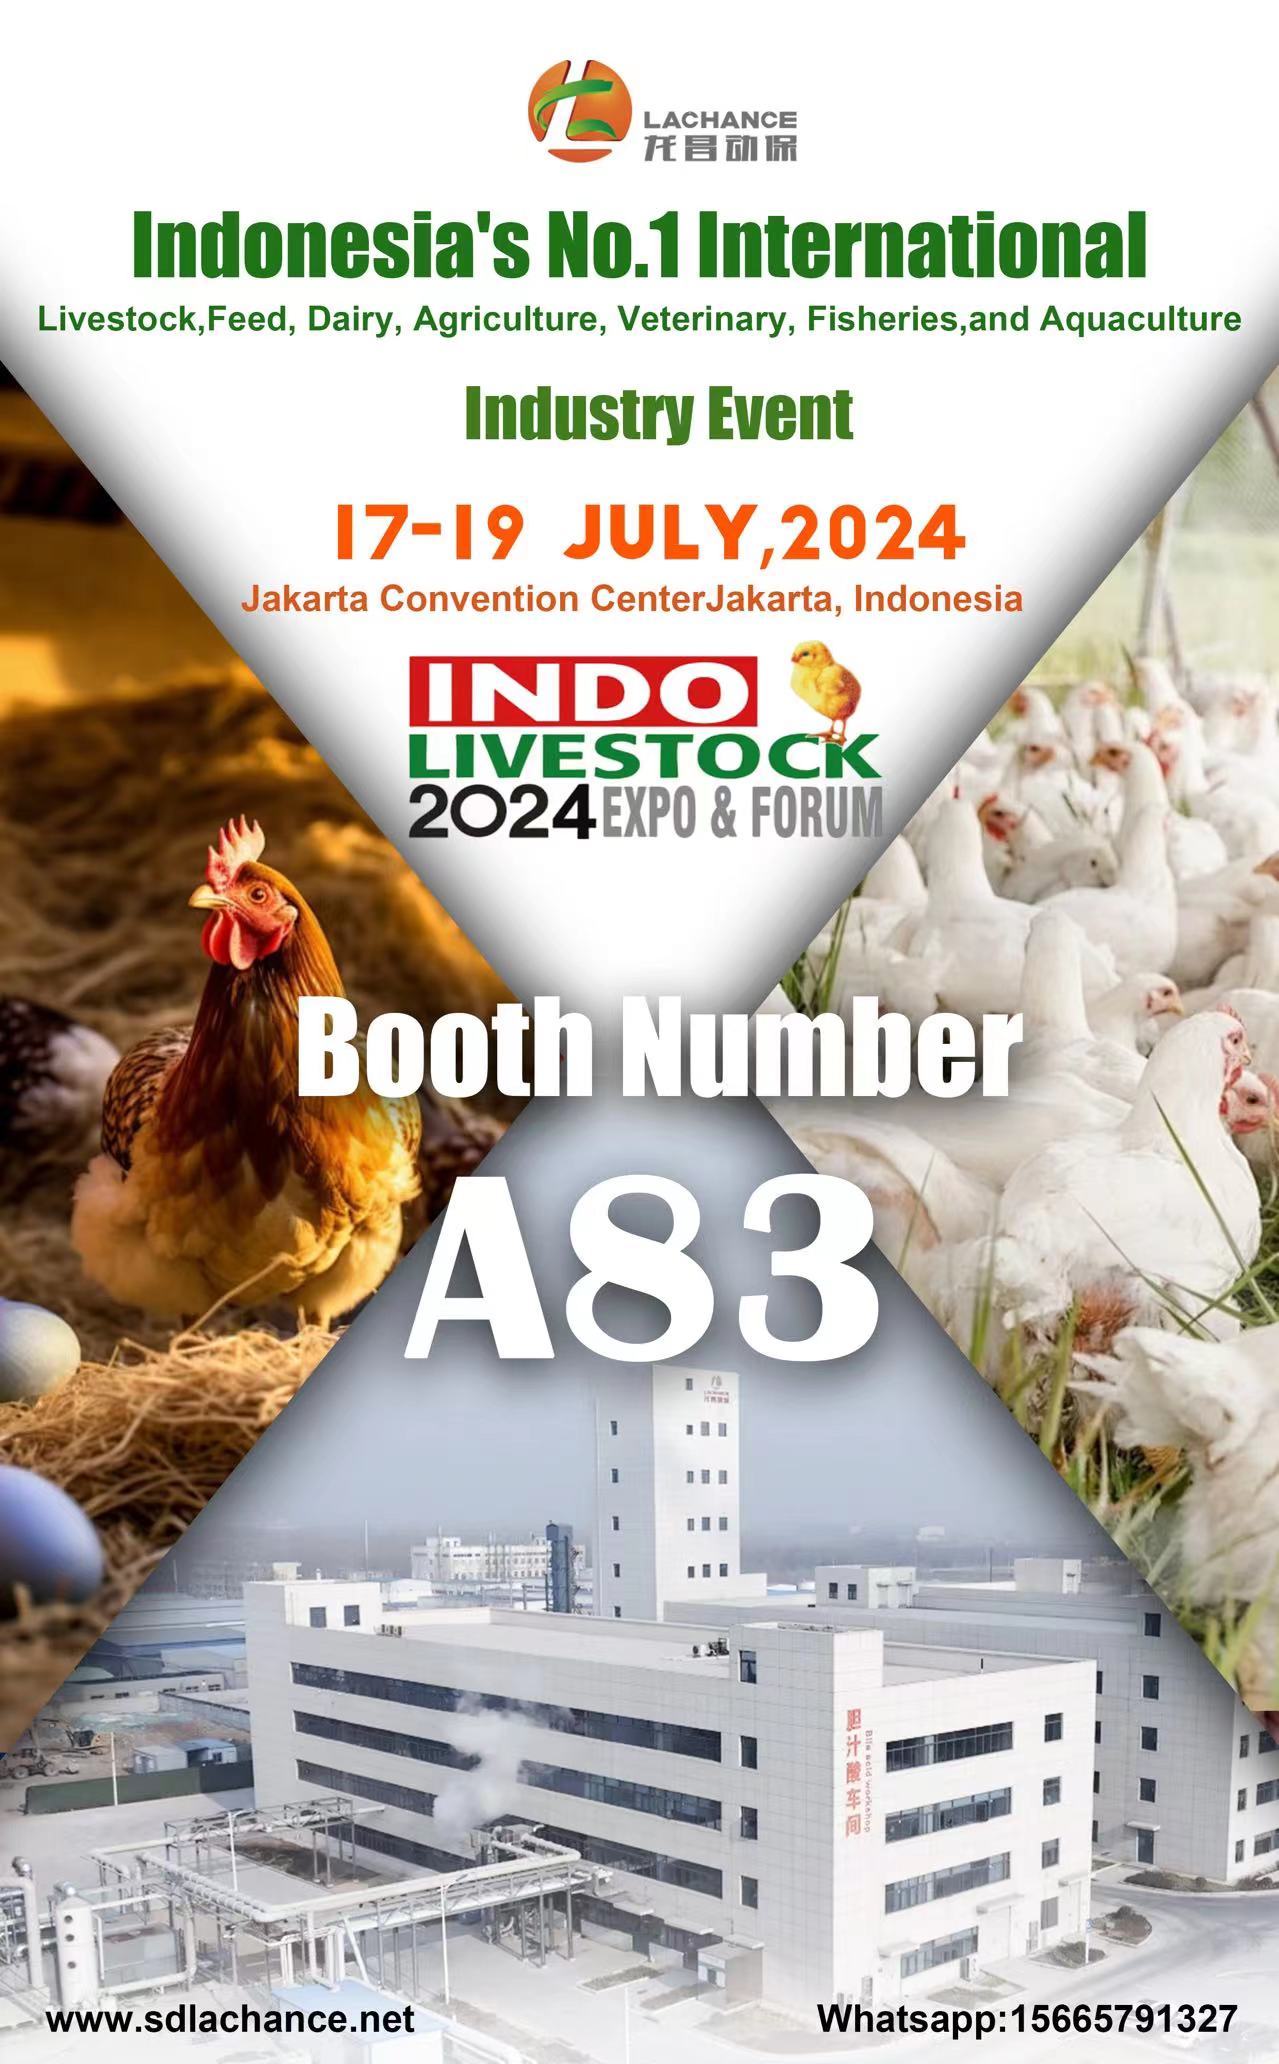 Lachance Group will be at IndoLivestock in Jakarta, Indonesia.